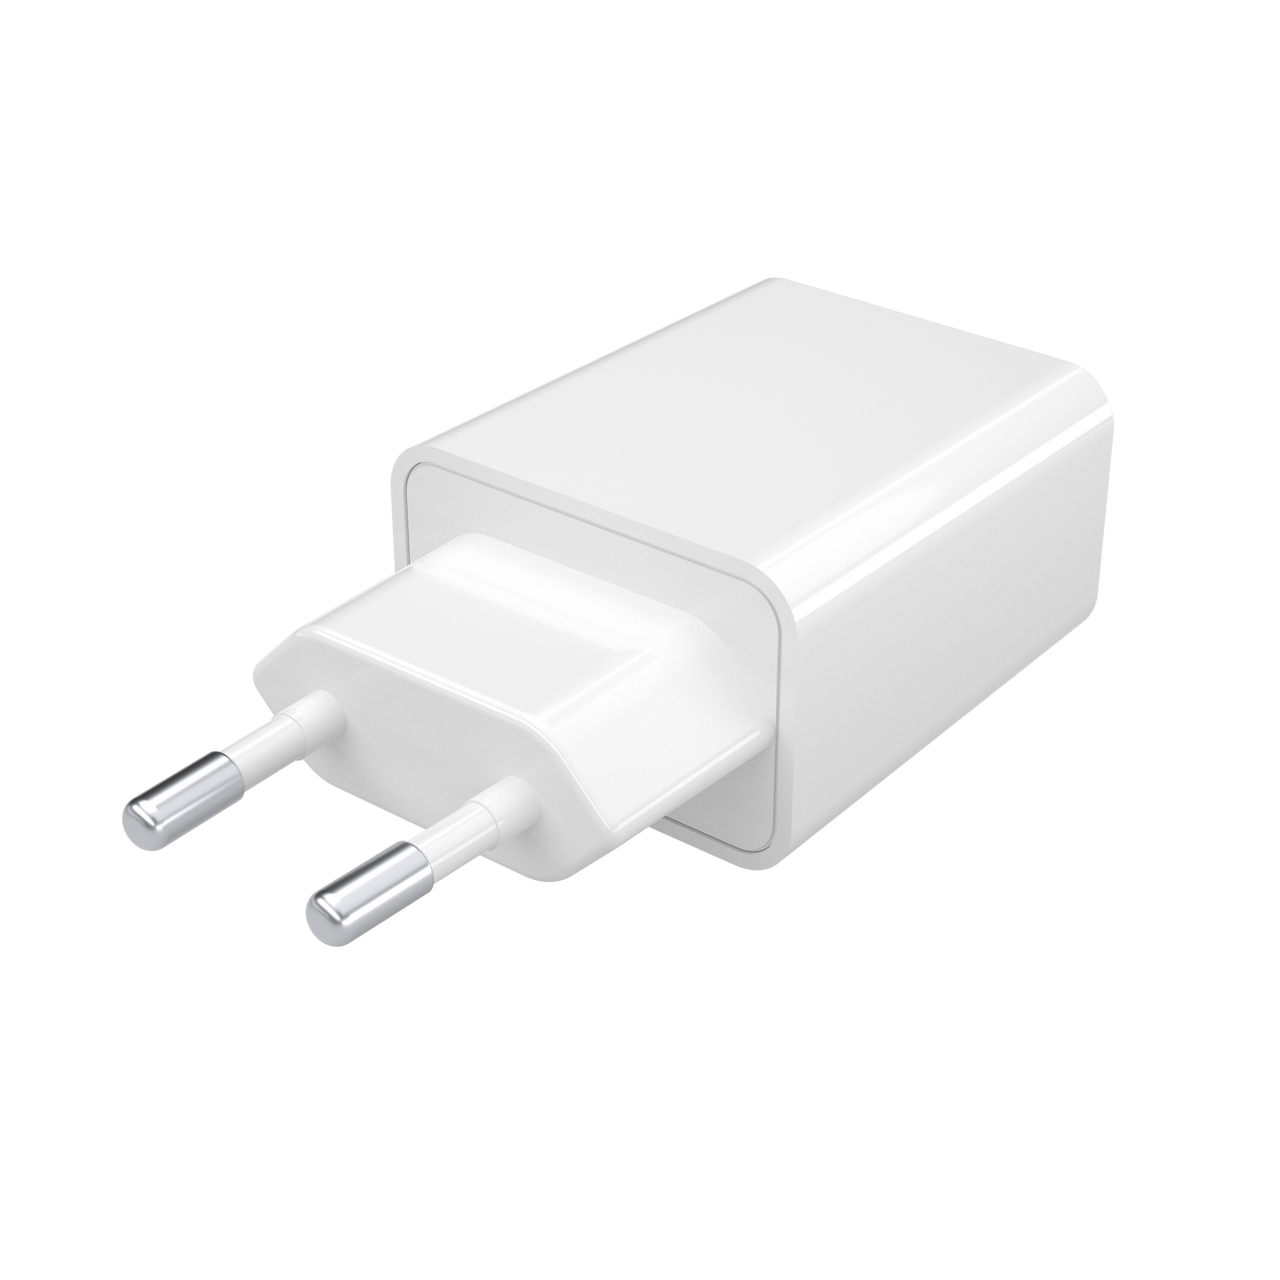 iPhone Fast Charger Kit - 20W PD Adapter & 1m USB-C to Lightning